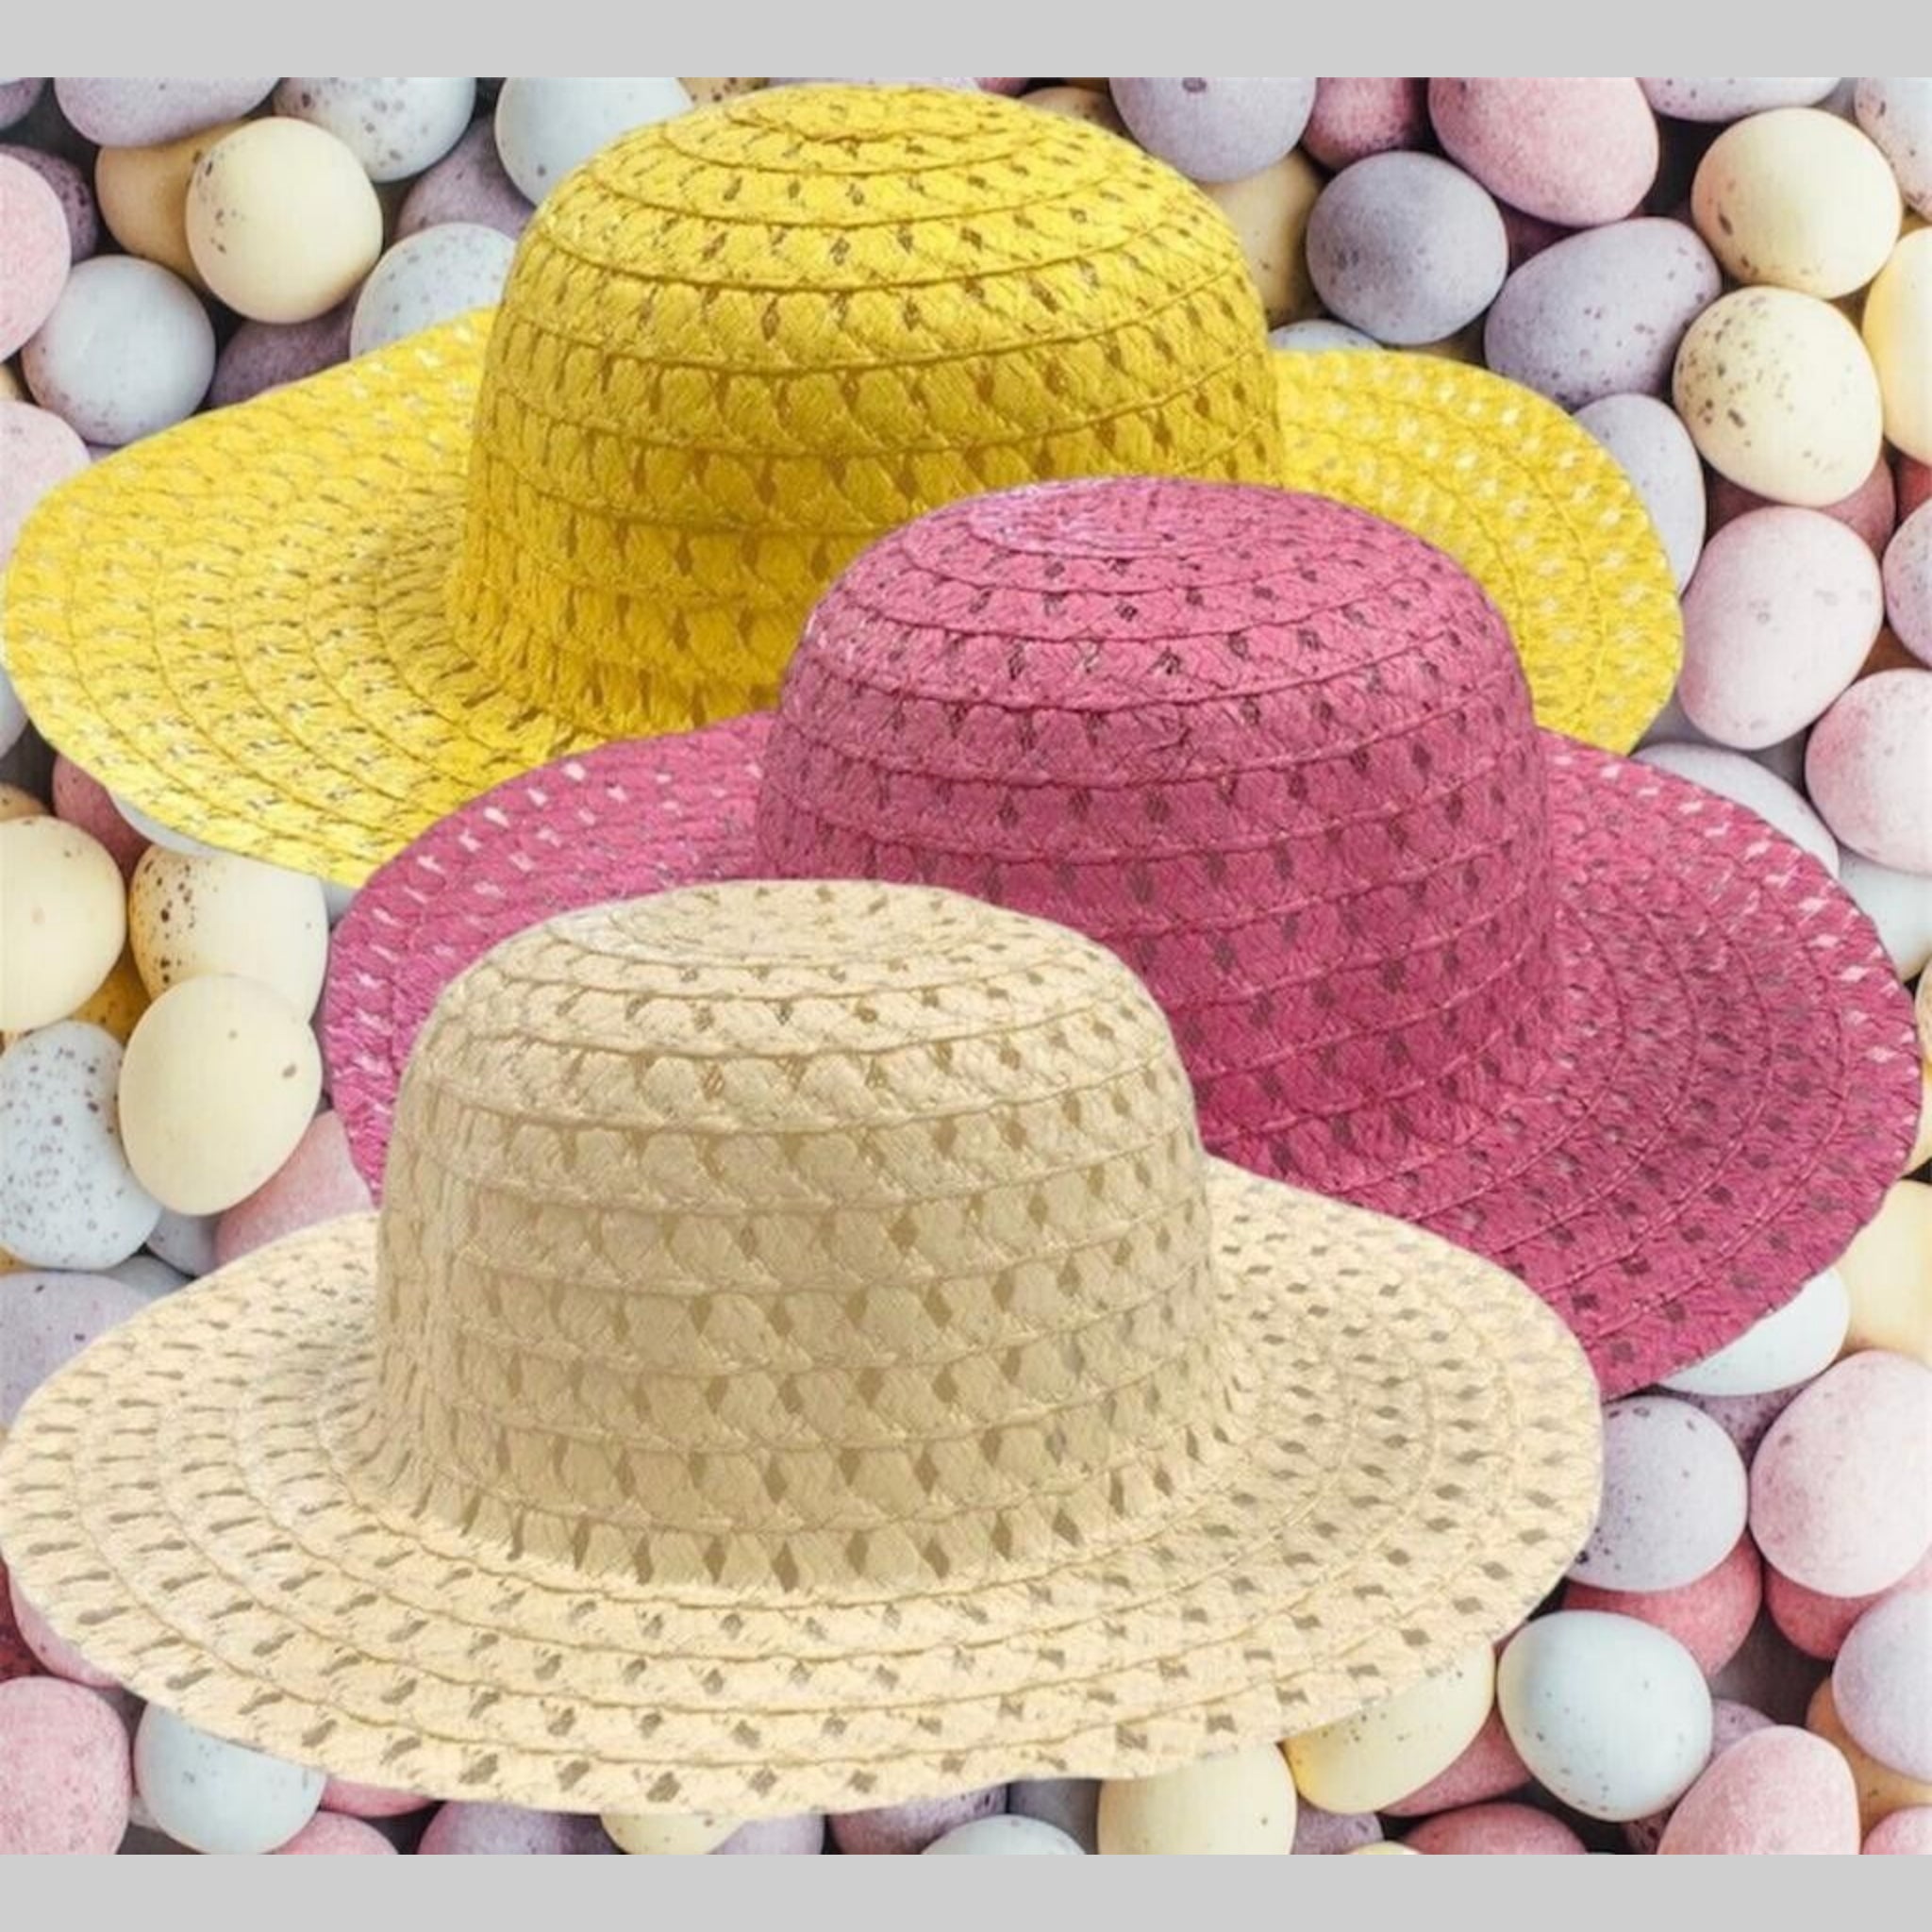 Beclen Harp 3 Easter Bonnet Art And Craft Straw Cowboy/Cowgirl Hats For Kids Parade Decoration-Perfect Gift For Children